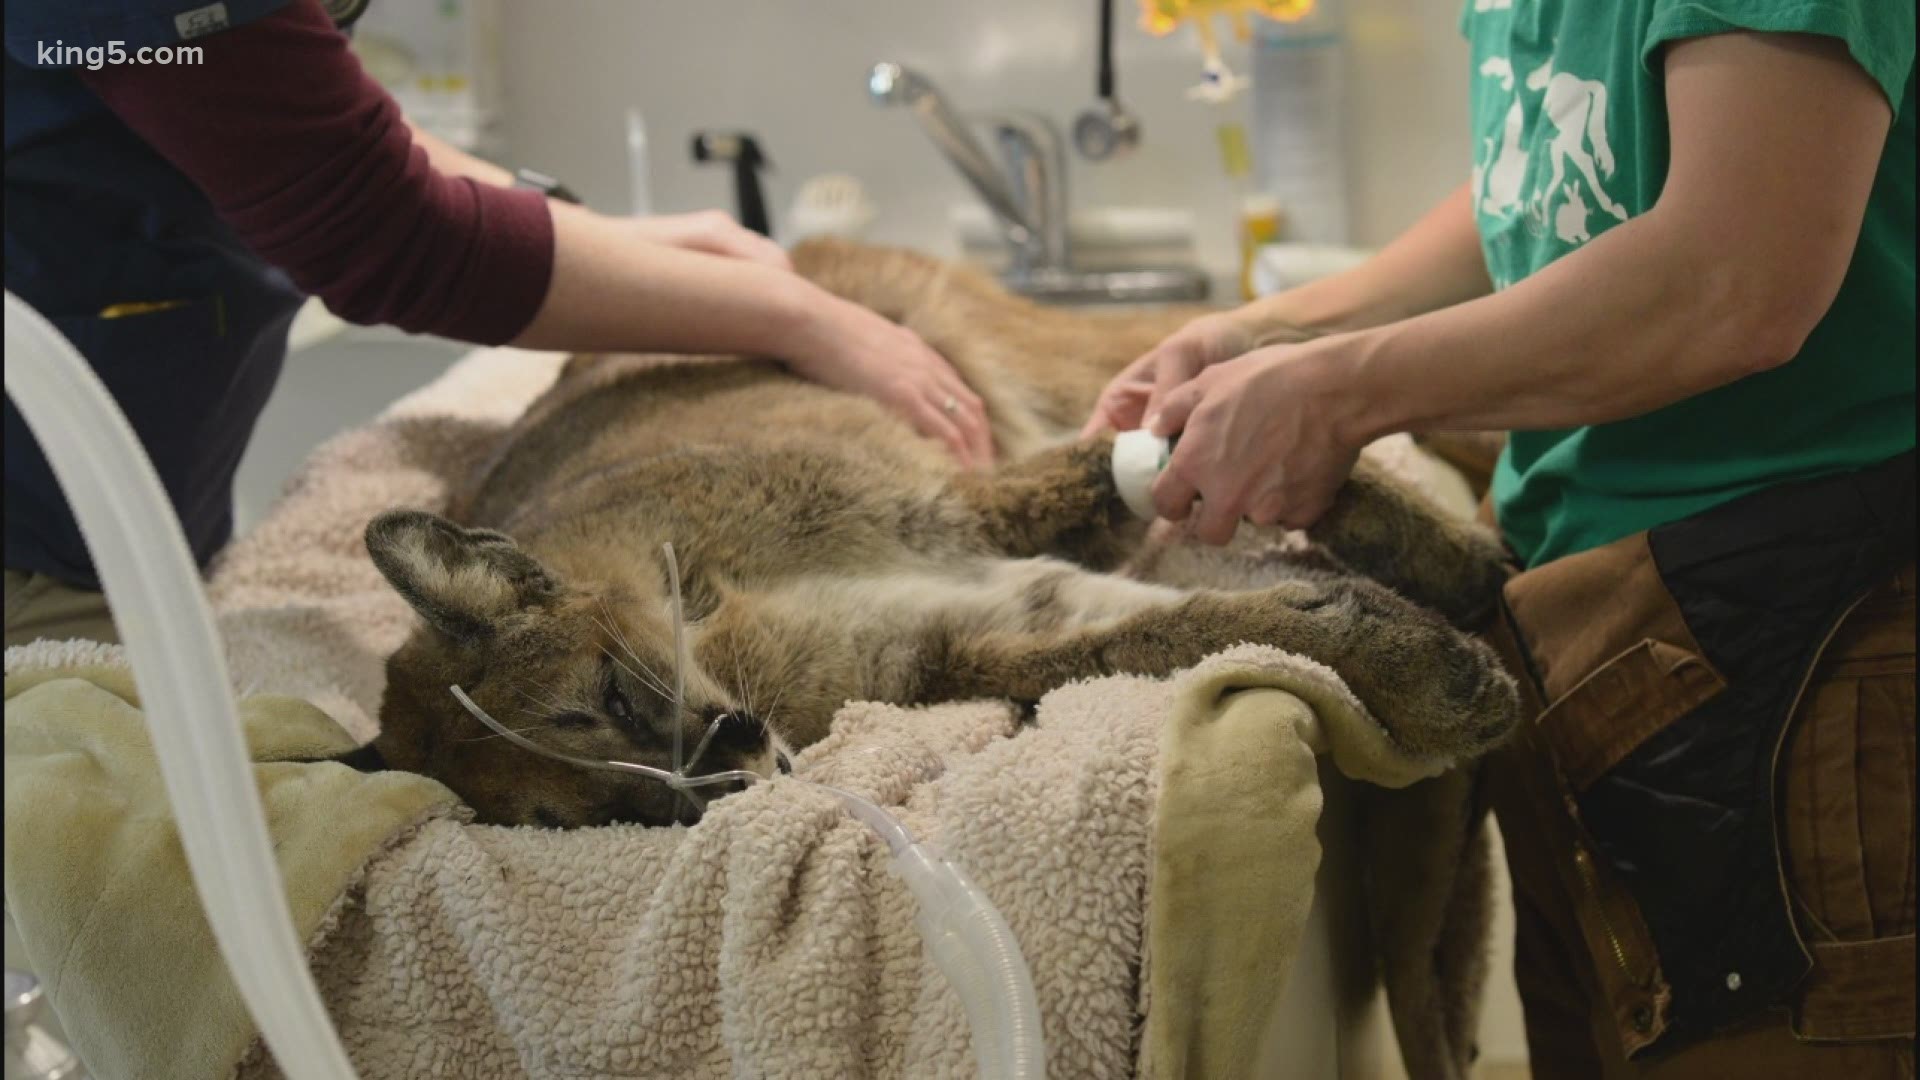 An orphaned cougar cub suffering from starvation found its way to the Central Valley Animal Rescue in Quilcene, just in time to get the help it needed.